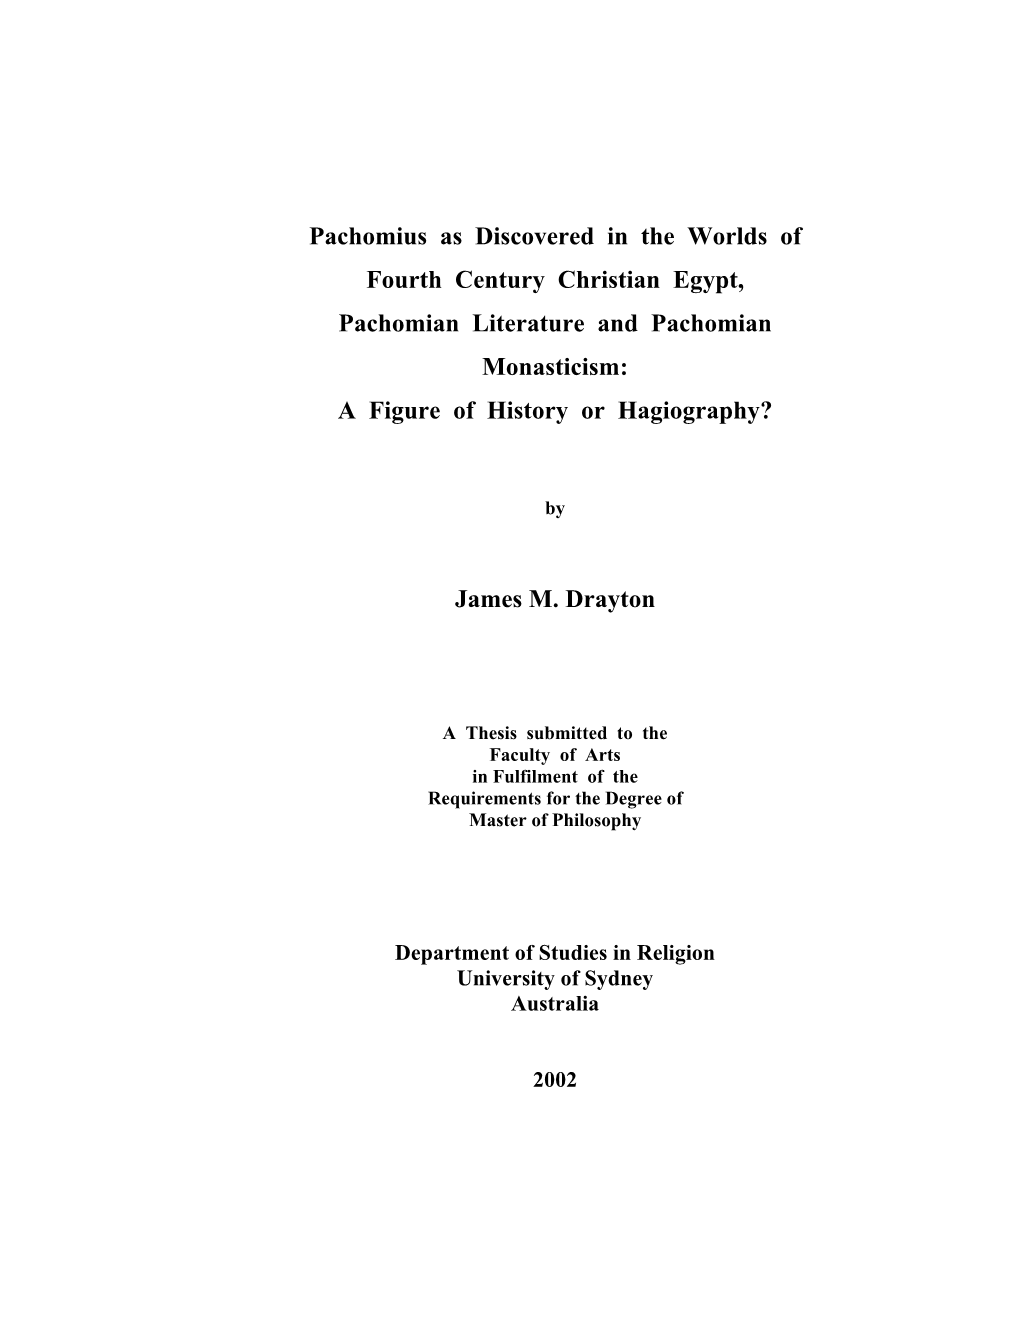 Pachomius As Discovered in the Worlds of Fourth Century Christian Egypt, Pachomian Literature and Pachomian Monasticism: a Figure of History Or Hagiography?